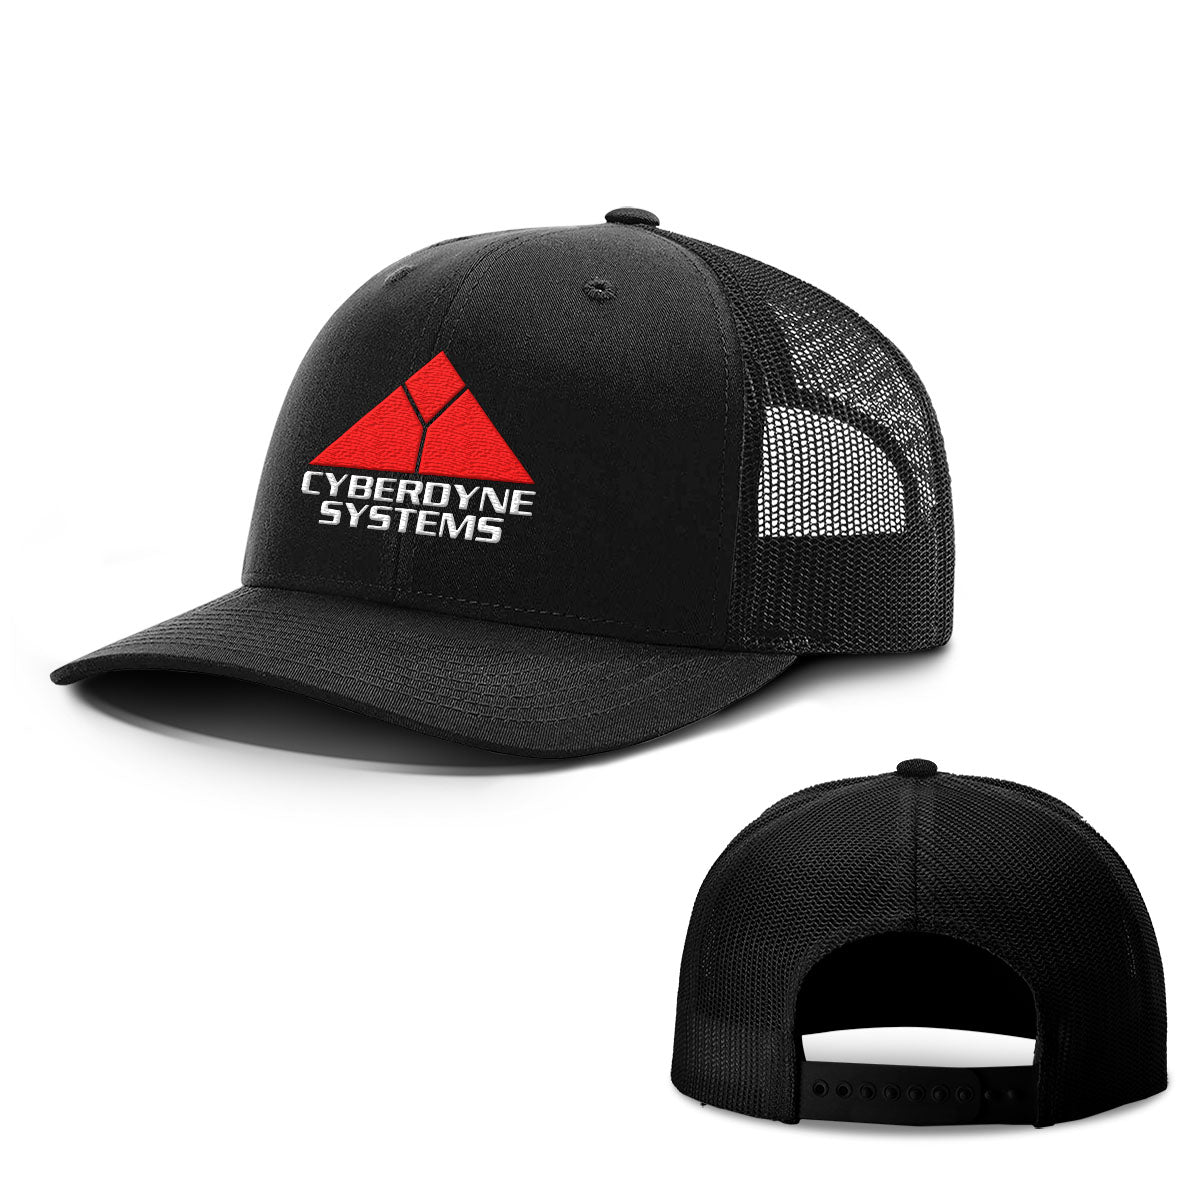 Cyberdyne Systems Hats - BustedTees.com